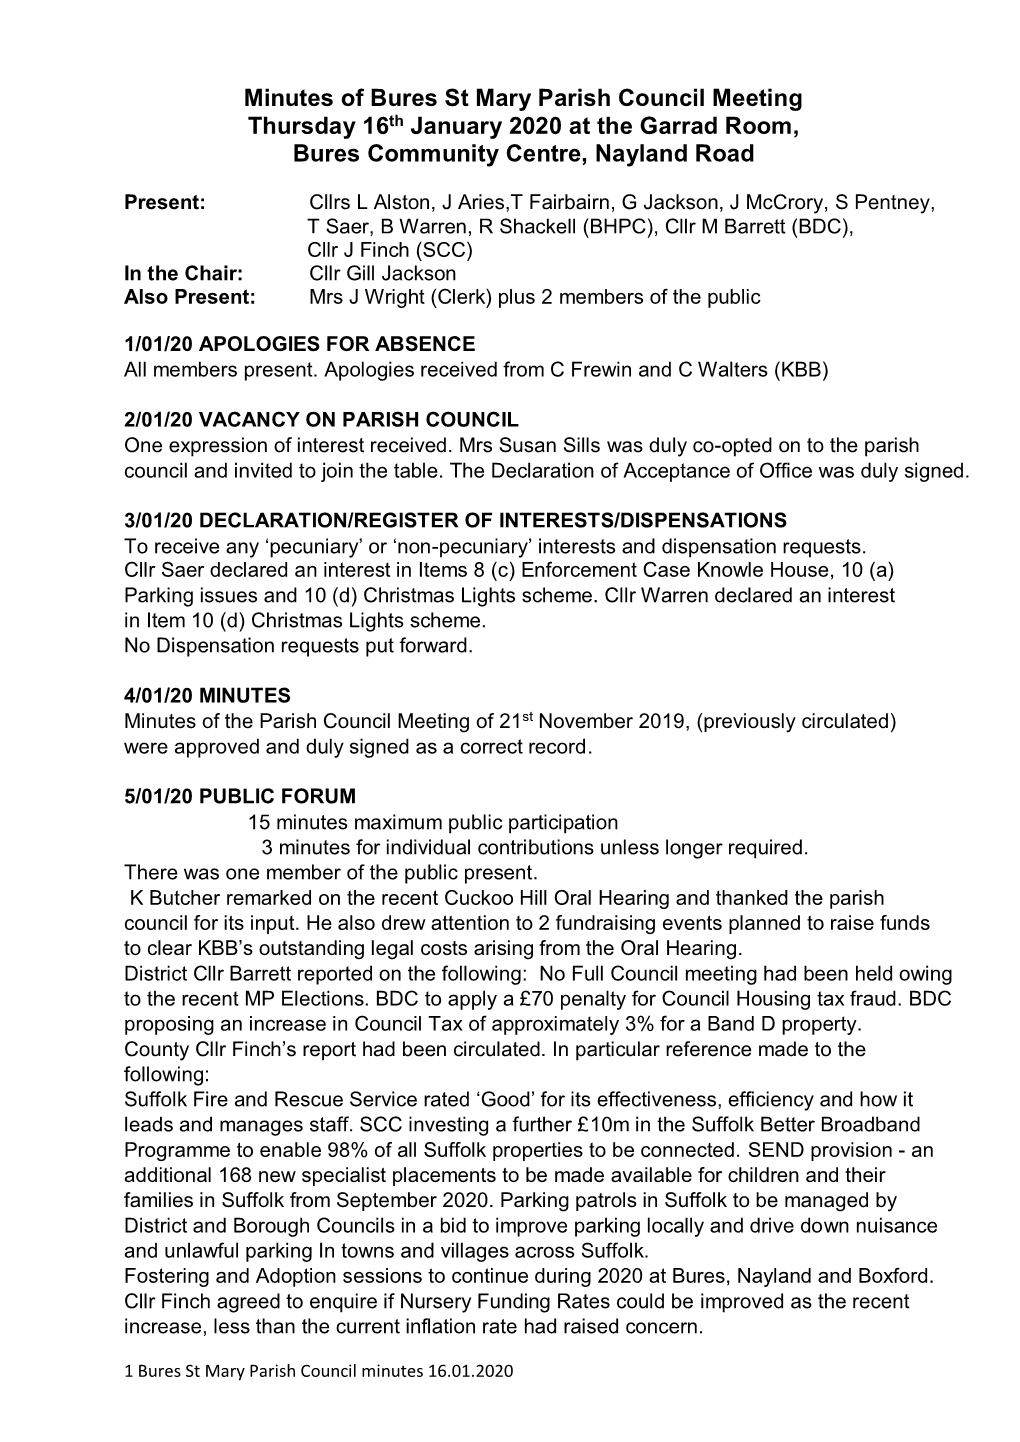 Minutes of Bures St Mary Parish Council Meeting Thursday 16Th January 2020 at the Garrad Room, Bures Community Centre, Nayland Road